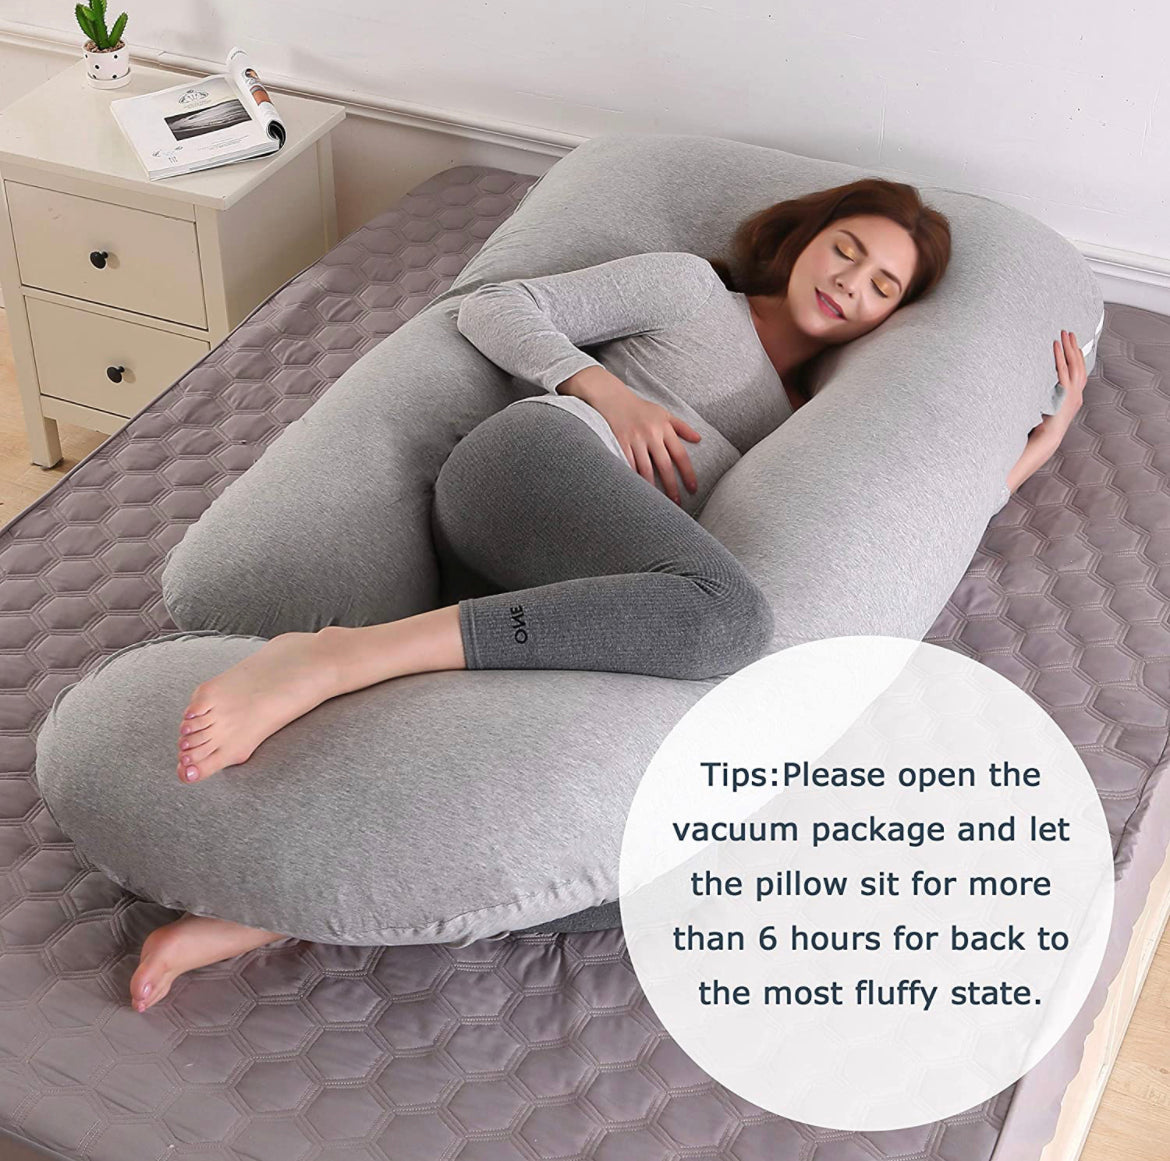 Full Body Maternity Pillows with Removable Cover.